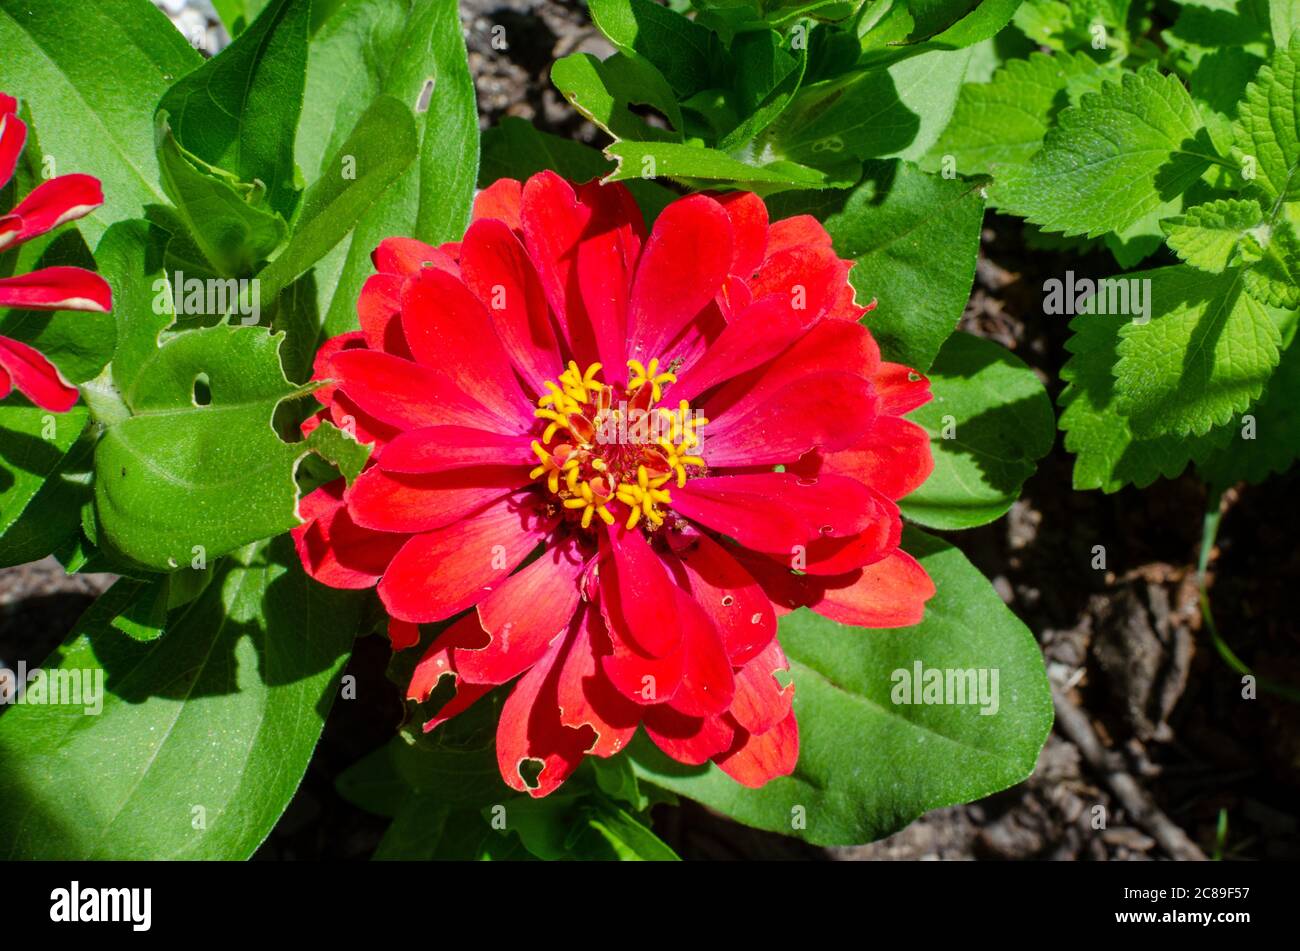 Red Dwarf Zinnia elegans flower and leaves showing some insect damage with eaten leaves and petals Stock Photo